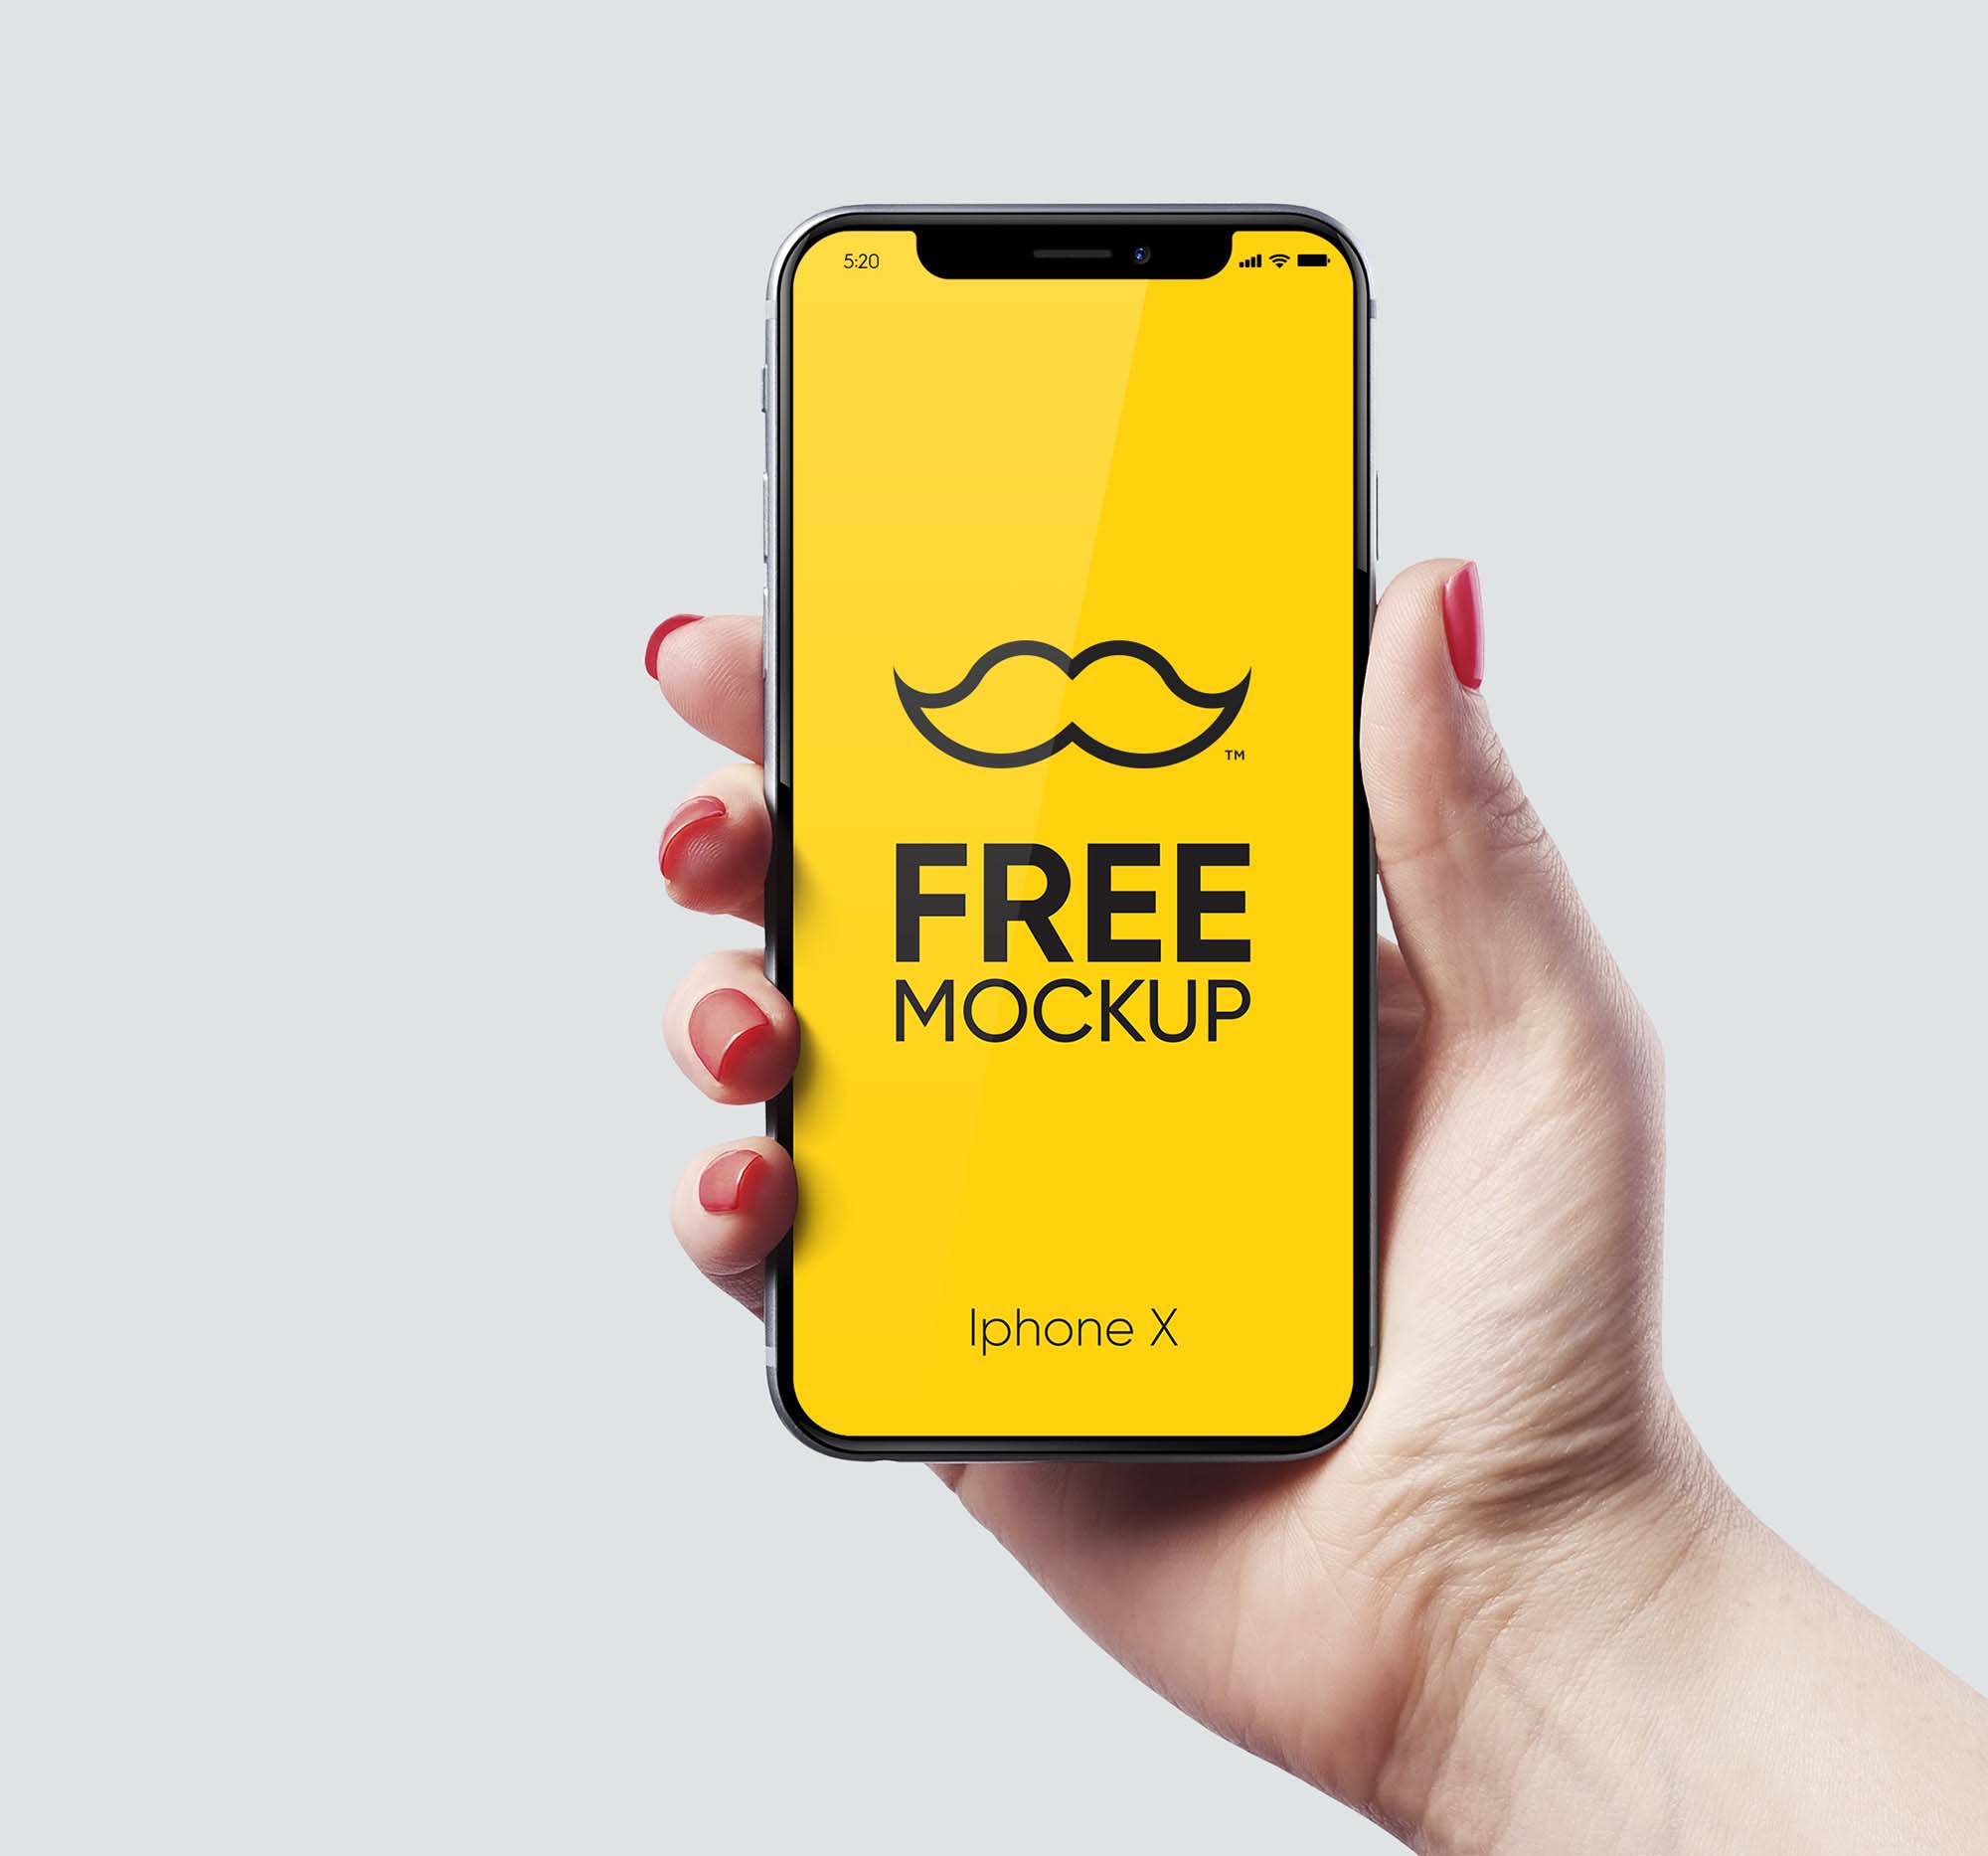 Download free-iphone-x-held-by-hand-mockup-psd | Decolore.Net